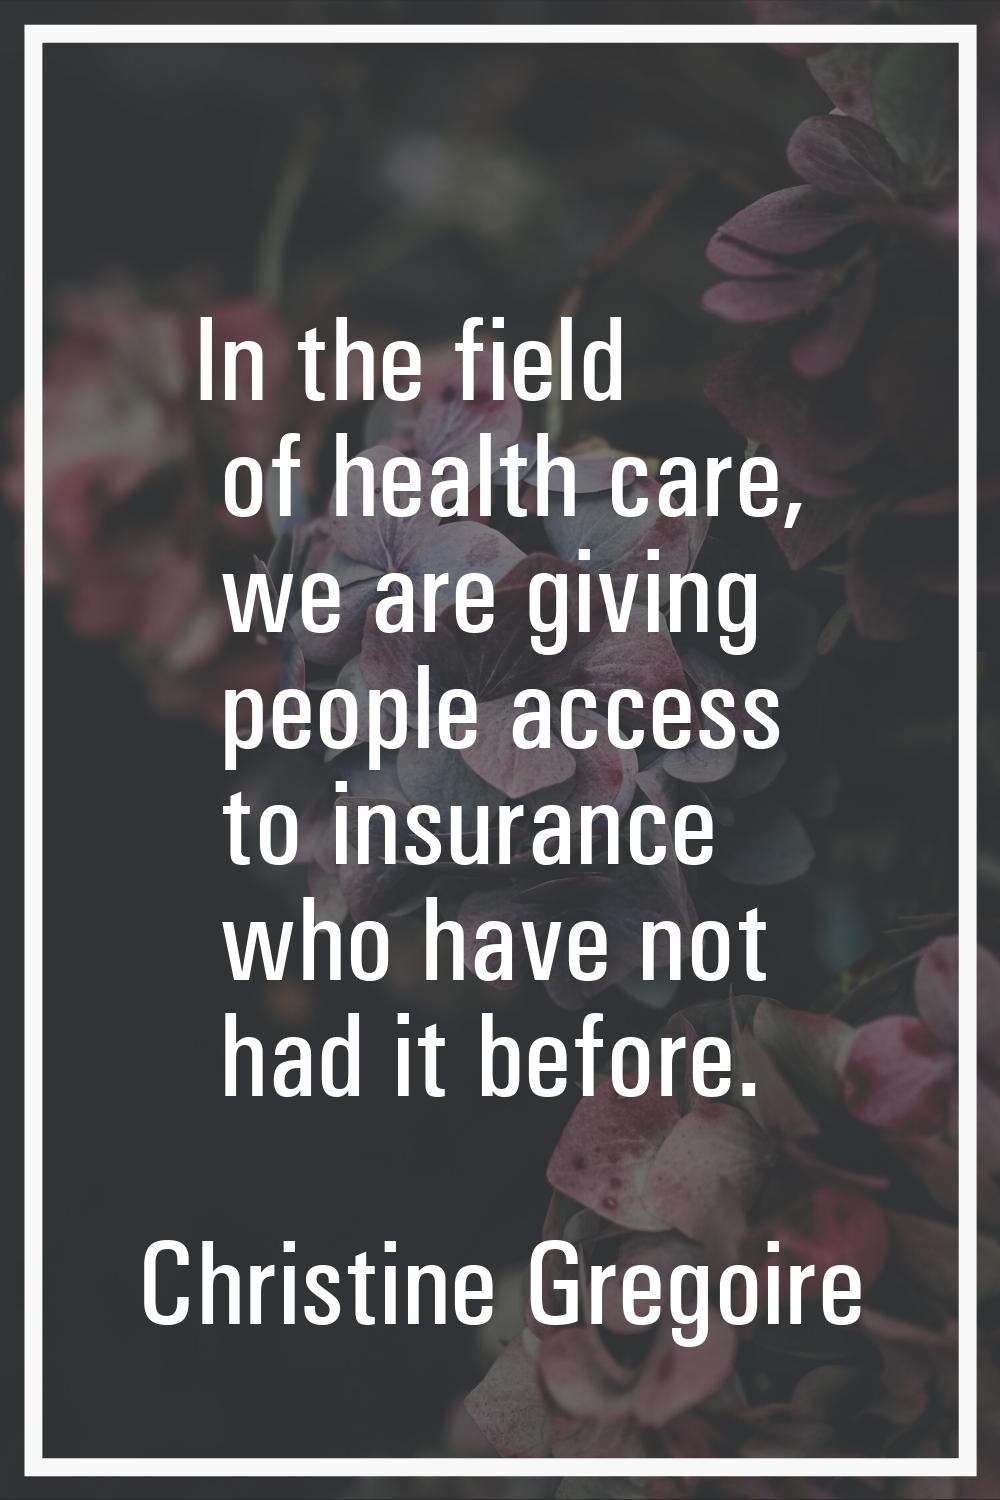 In the field of health care, we are giving people access to insurance who have not had it before.